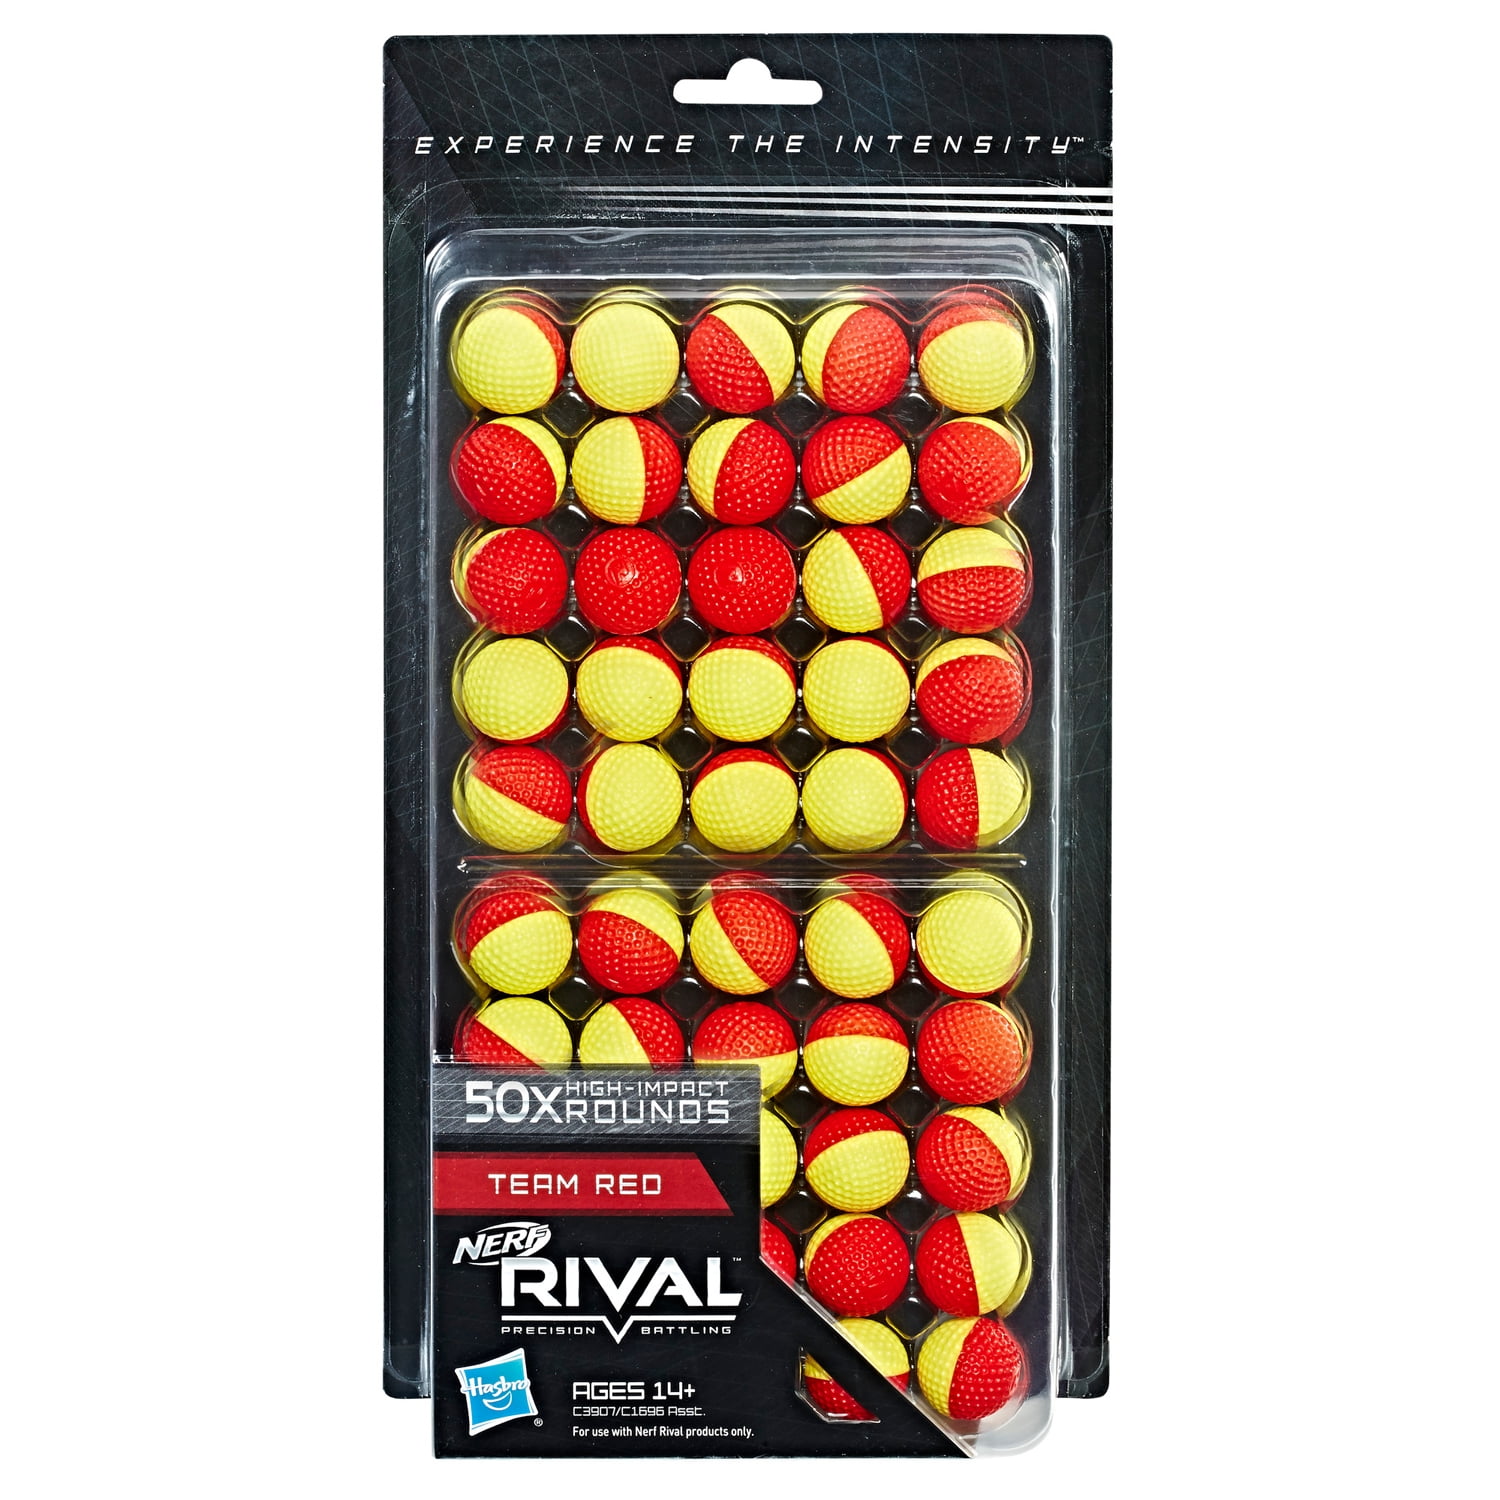 Hasbro Nerf Rival E3397 Precision Battling 30x High-impact Rounds Refills for sale online